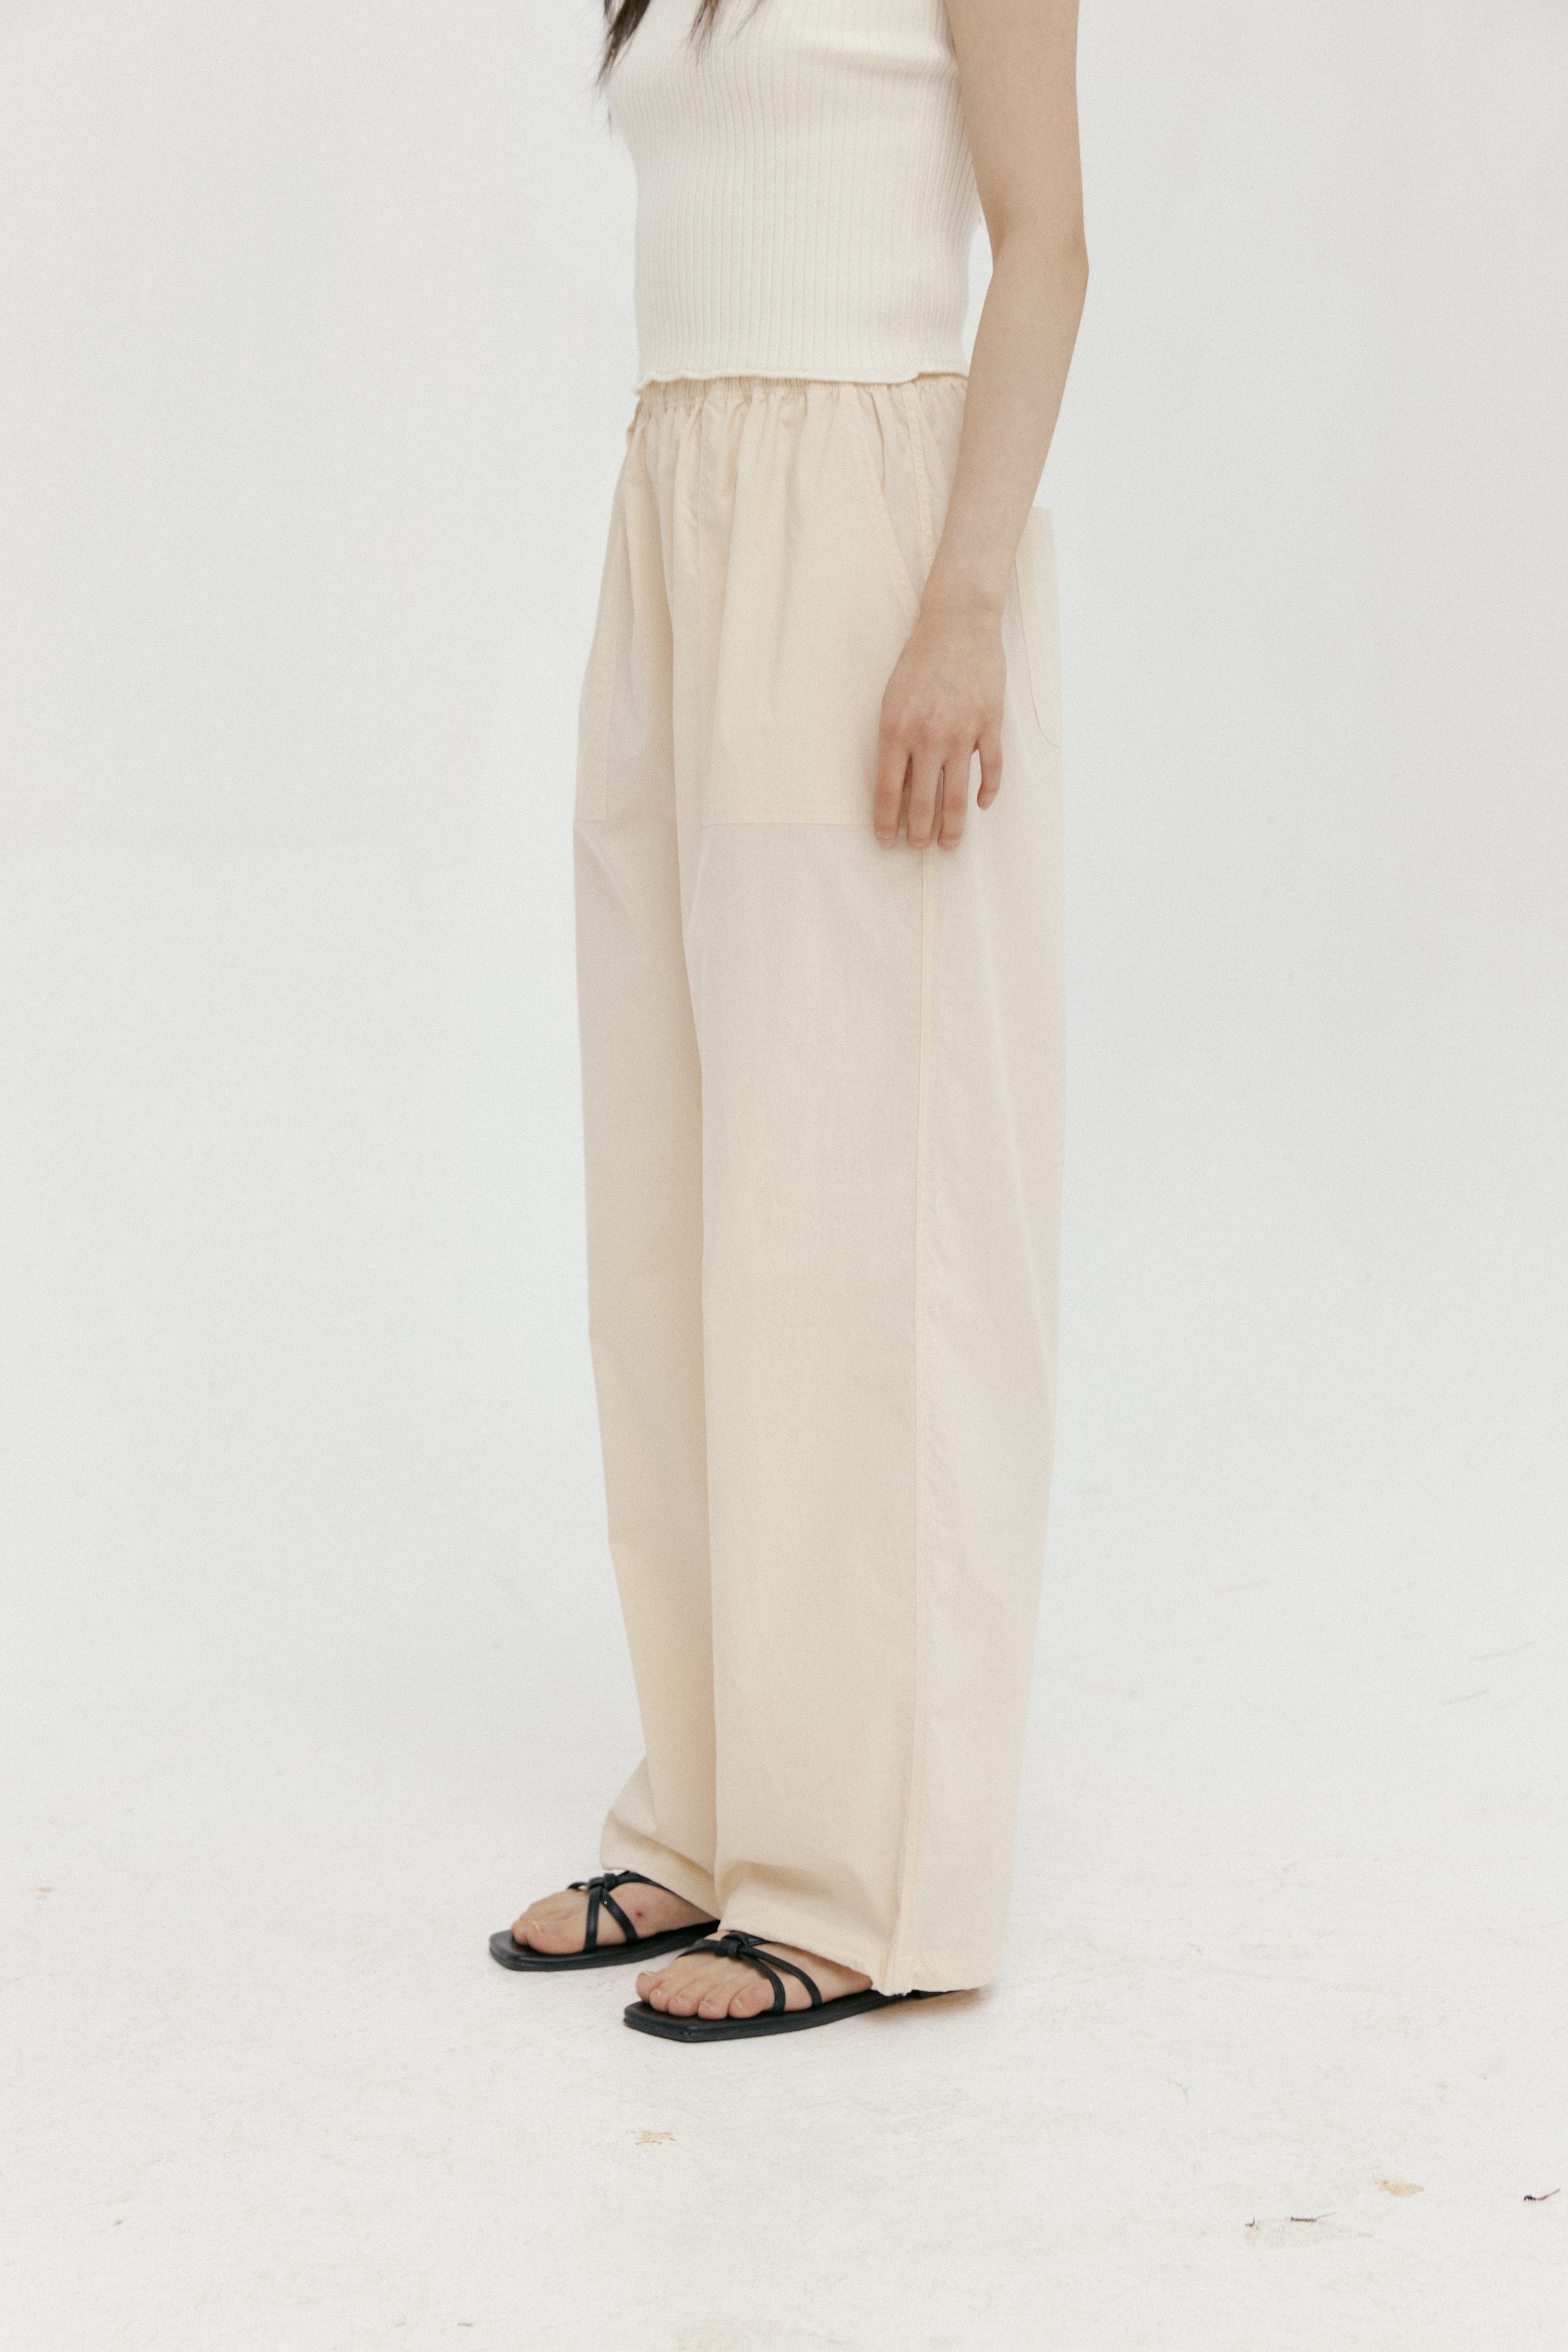 Cotton String Banded Pants In Cream